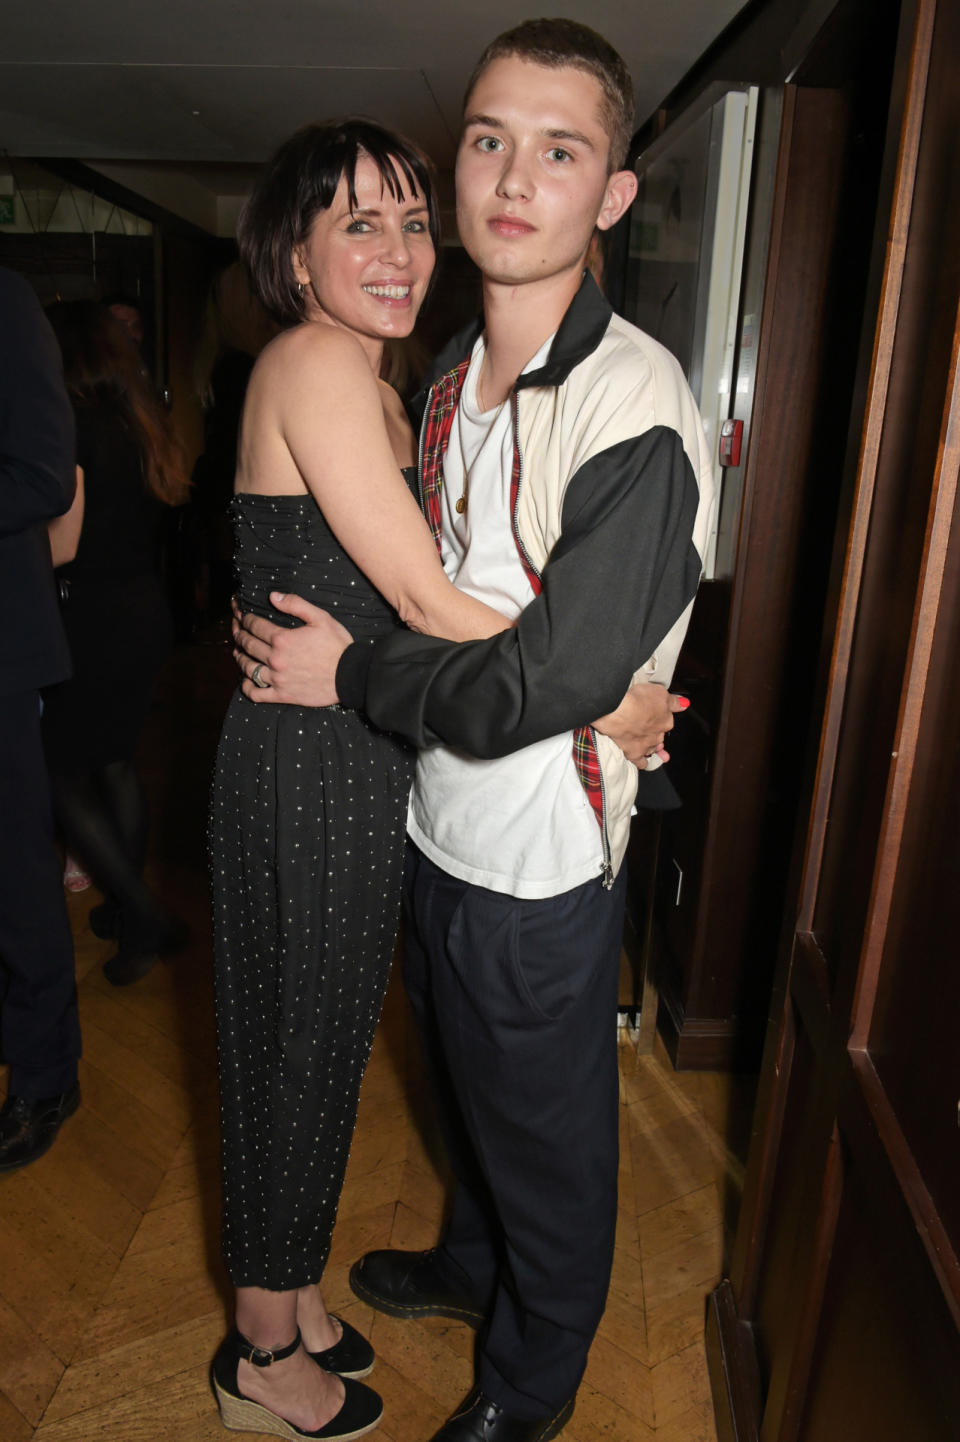 Jude Law’s oldest son Rafferty (pictured here with his mother Sadie Frost) has already landed a number of modeling gigs. At 18, he’s walked in DKNY’s men’s fashion show, called one of the “Best Dressed Men in Britain” by “GQ,” and has, of course, appeared in “Teen Vogue.” “I’m in a band, Dirty Harrys. My best friend Marley and I write all the songs, and we’ve been playing gigs around London,” he told the magazine. “I would love to keep evolving with my band, recording more songs, and touring. I think I will always be in be in music!”